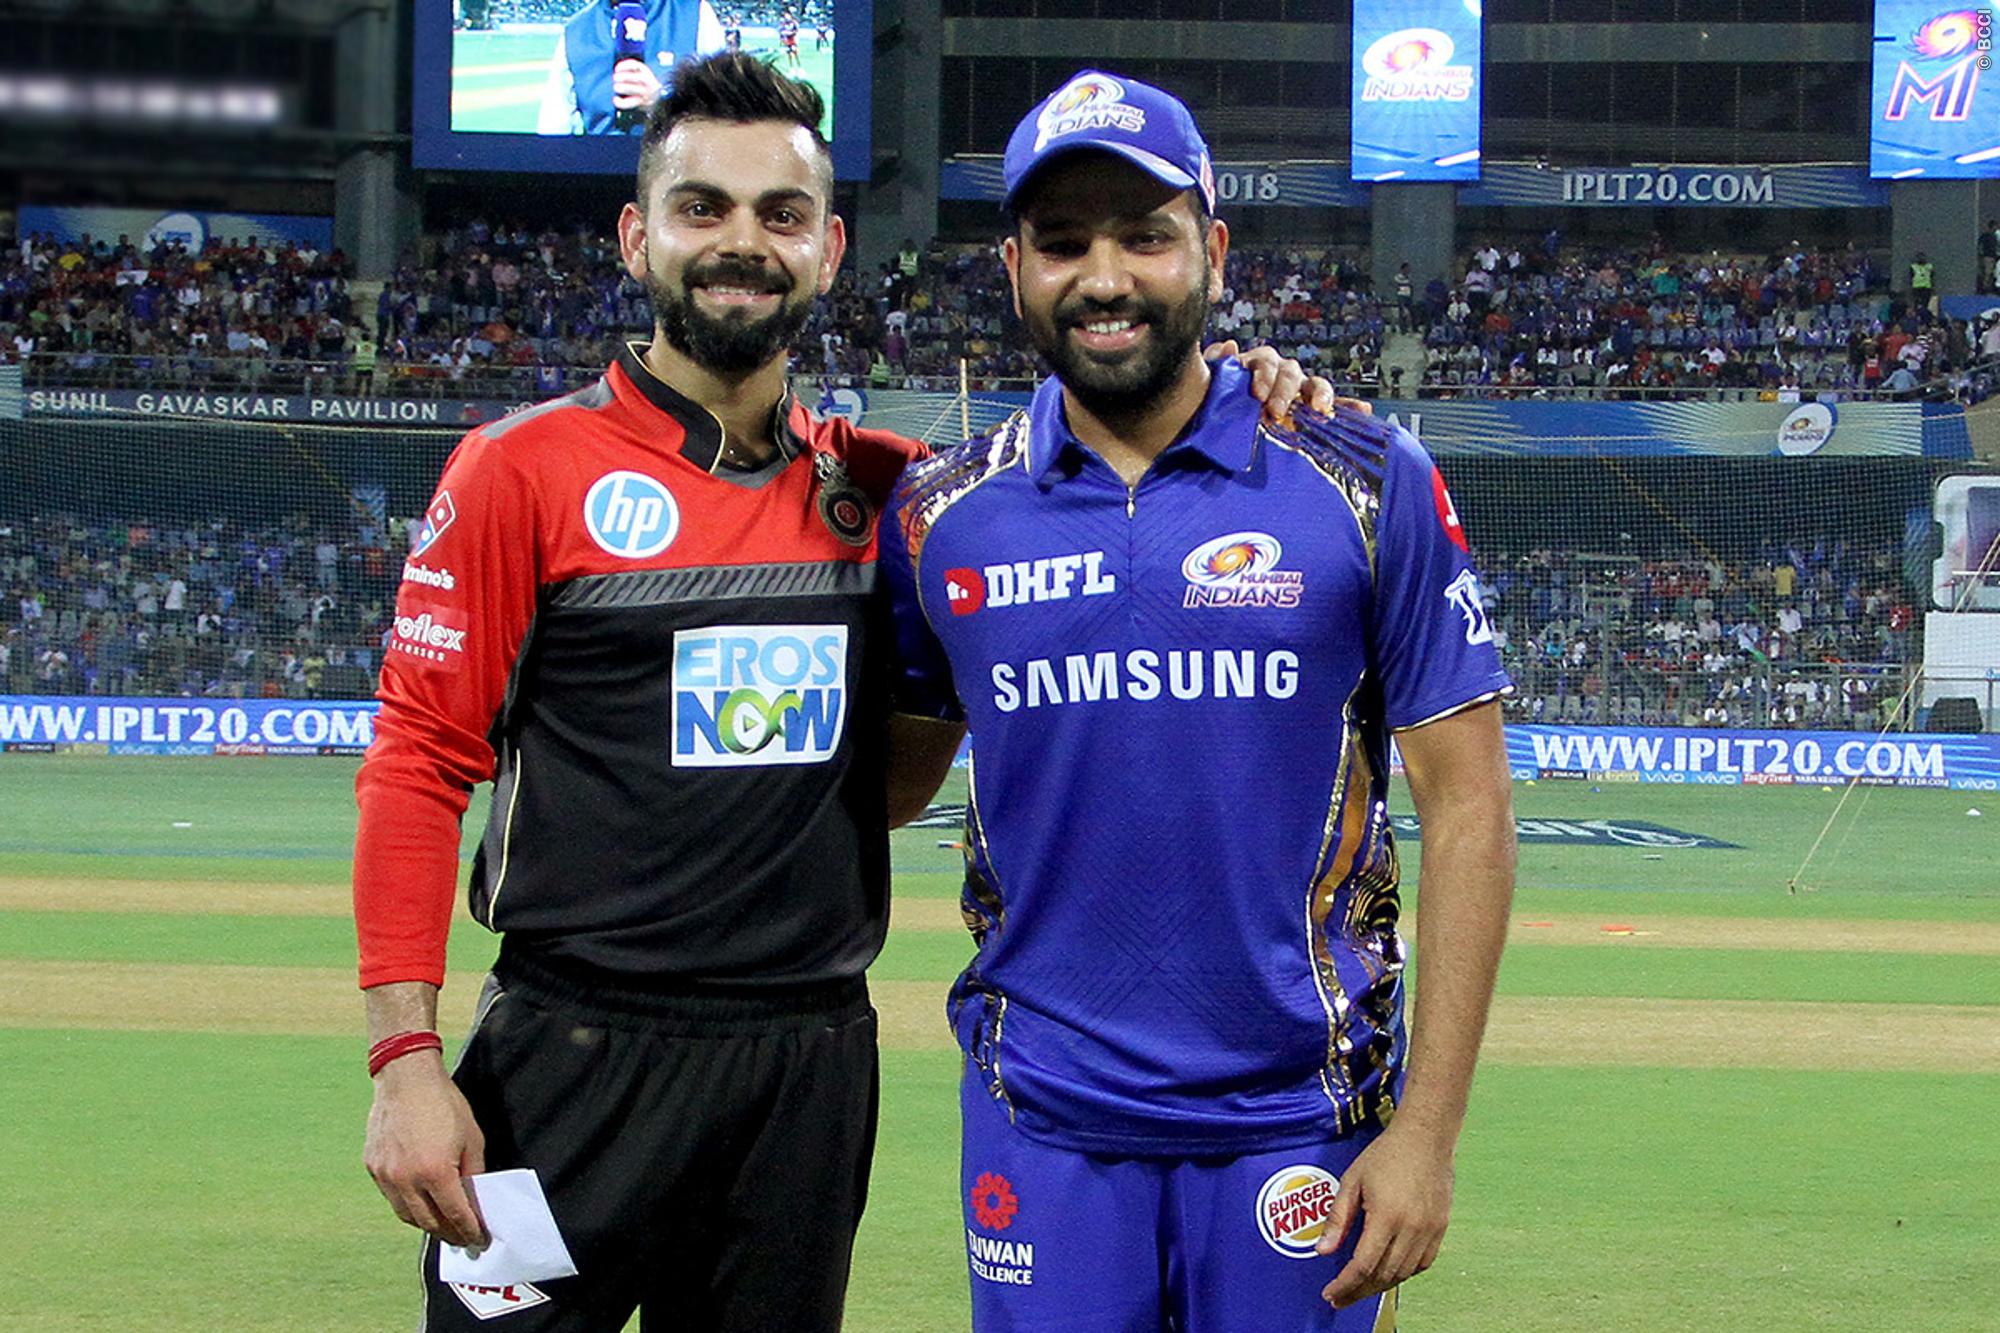 We are going to win the IPL this year, says RCB Dan Christian